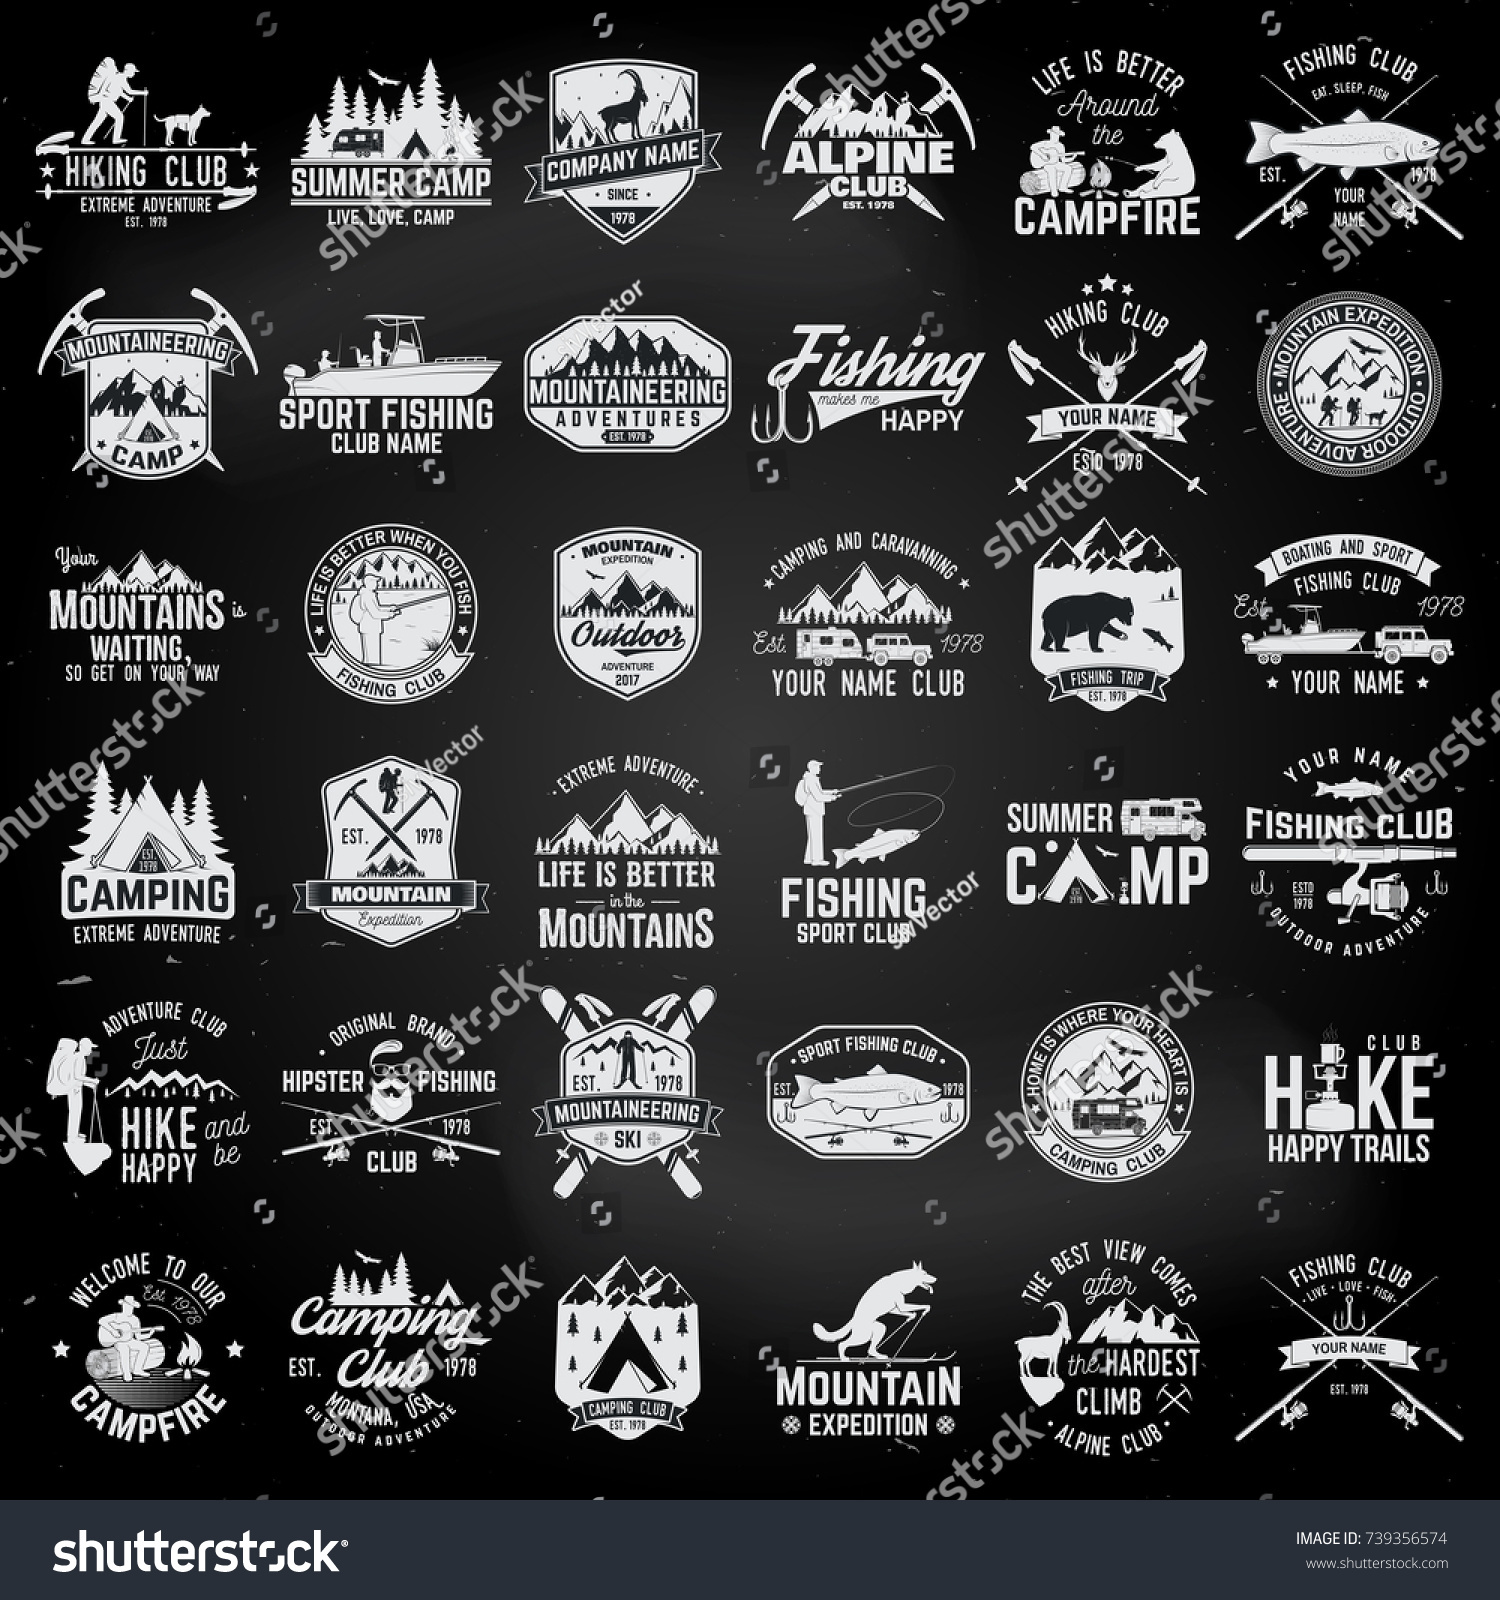 5,927 Fishing camping logo Images, Stock Photos & Vectors | Shutterstock